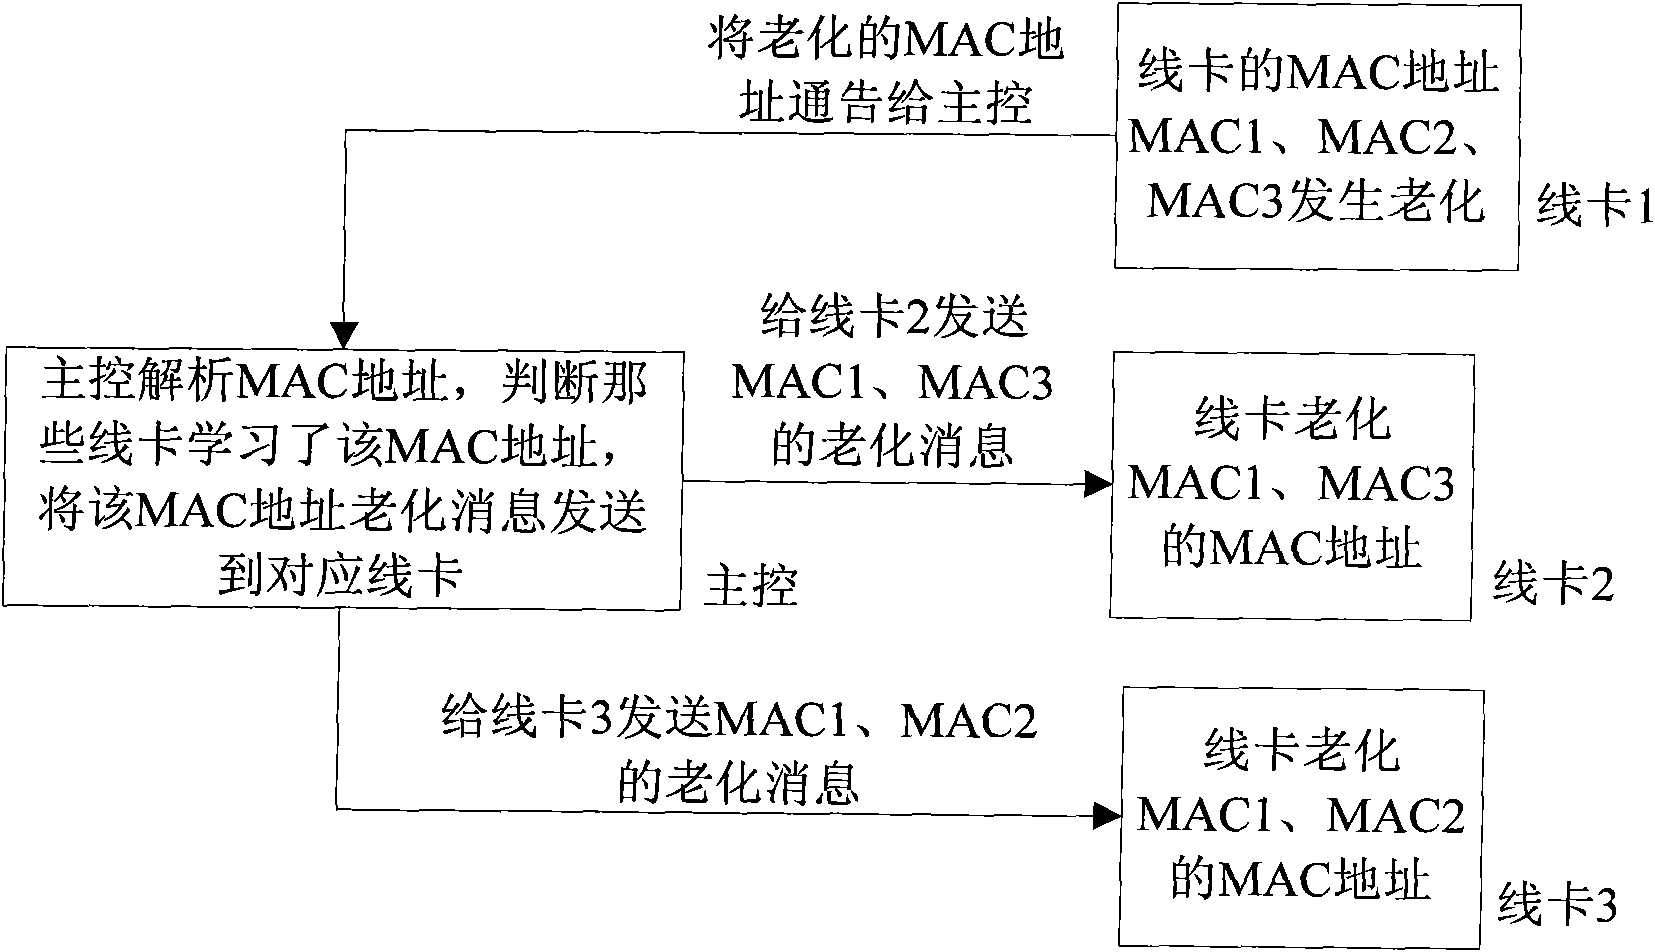 Conditional synchronization method for MAC address table entry of distributed switch